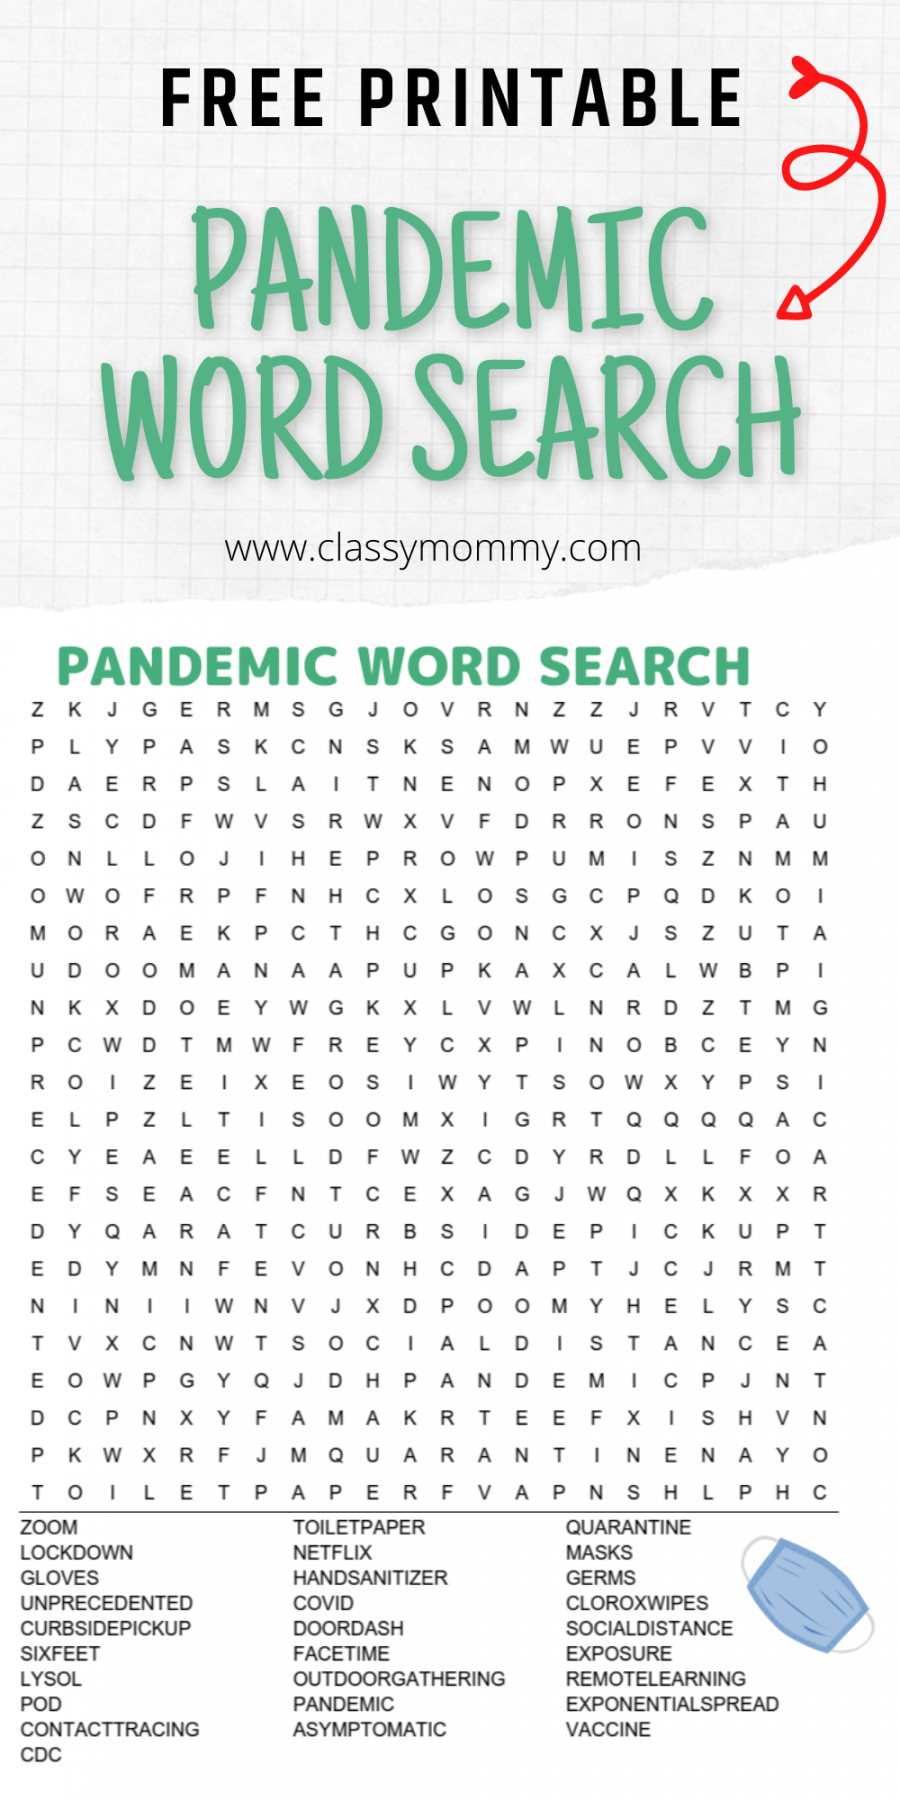 Free Word Search Printables - Printable - Free Printable Pandemic Word Search - Classy Mommy